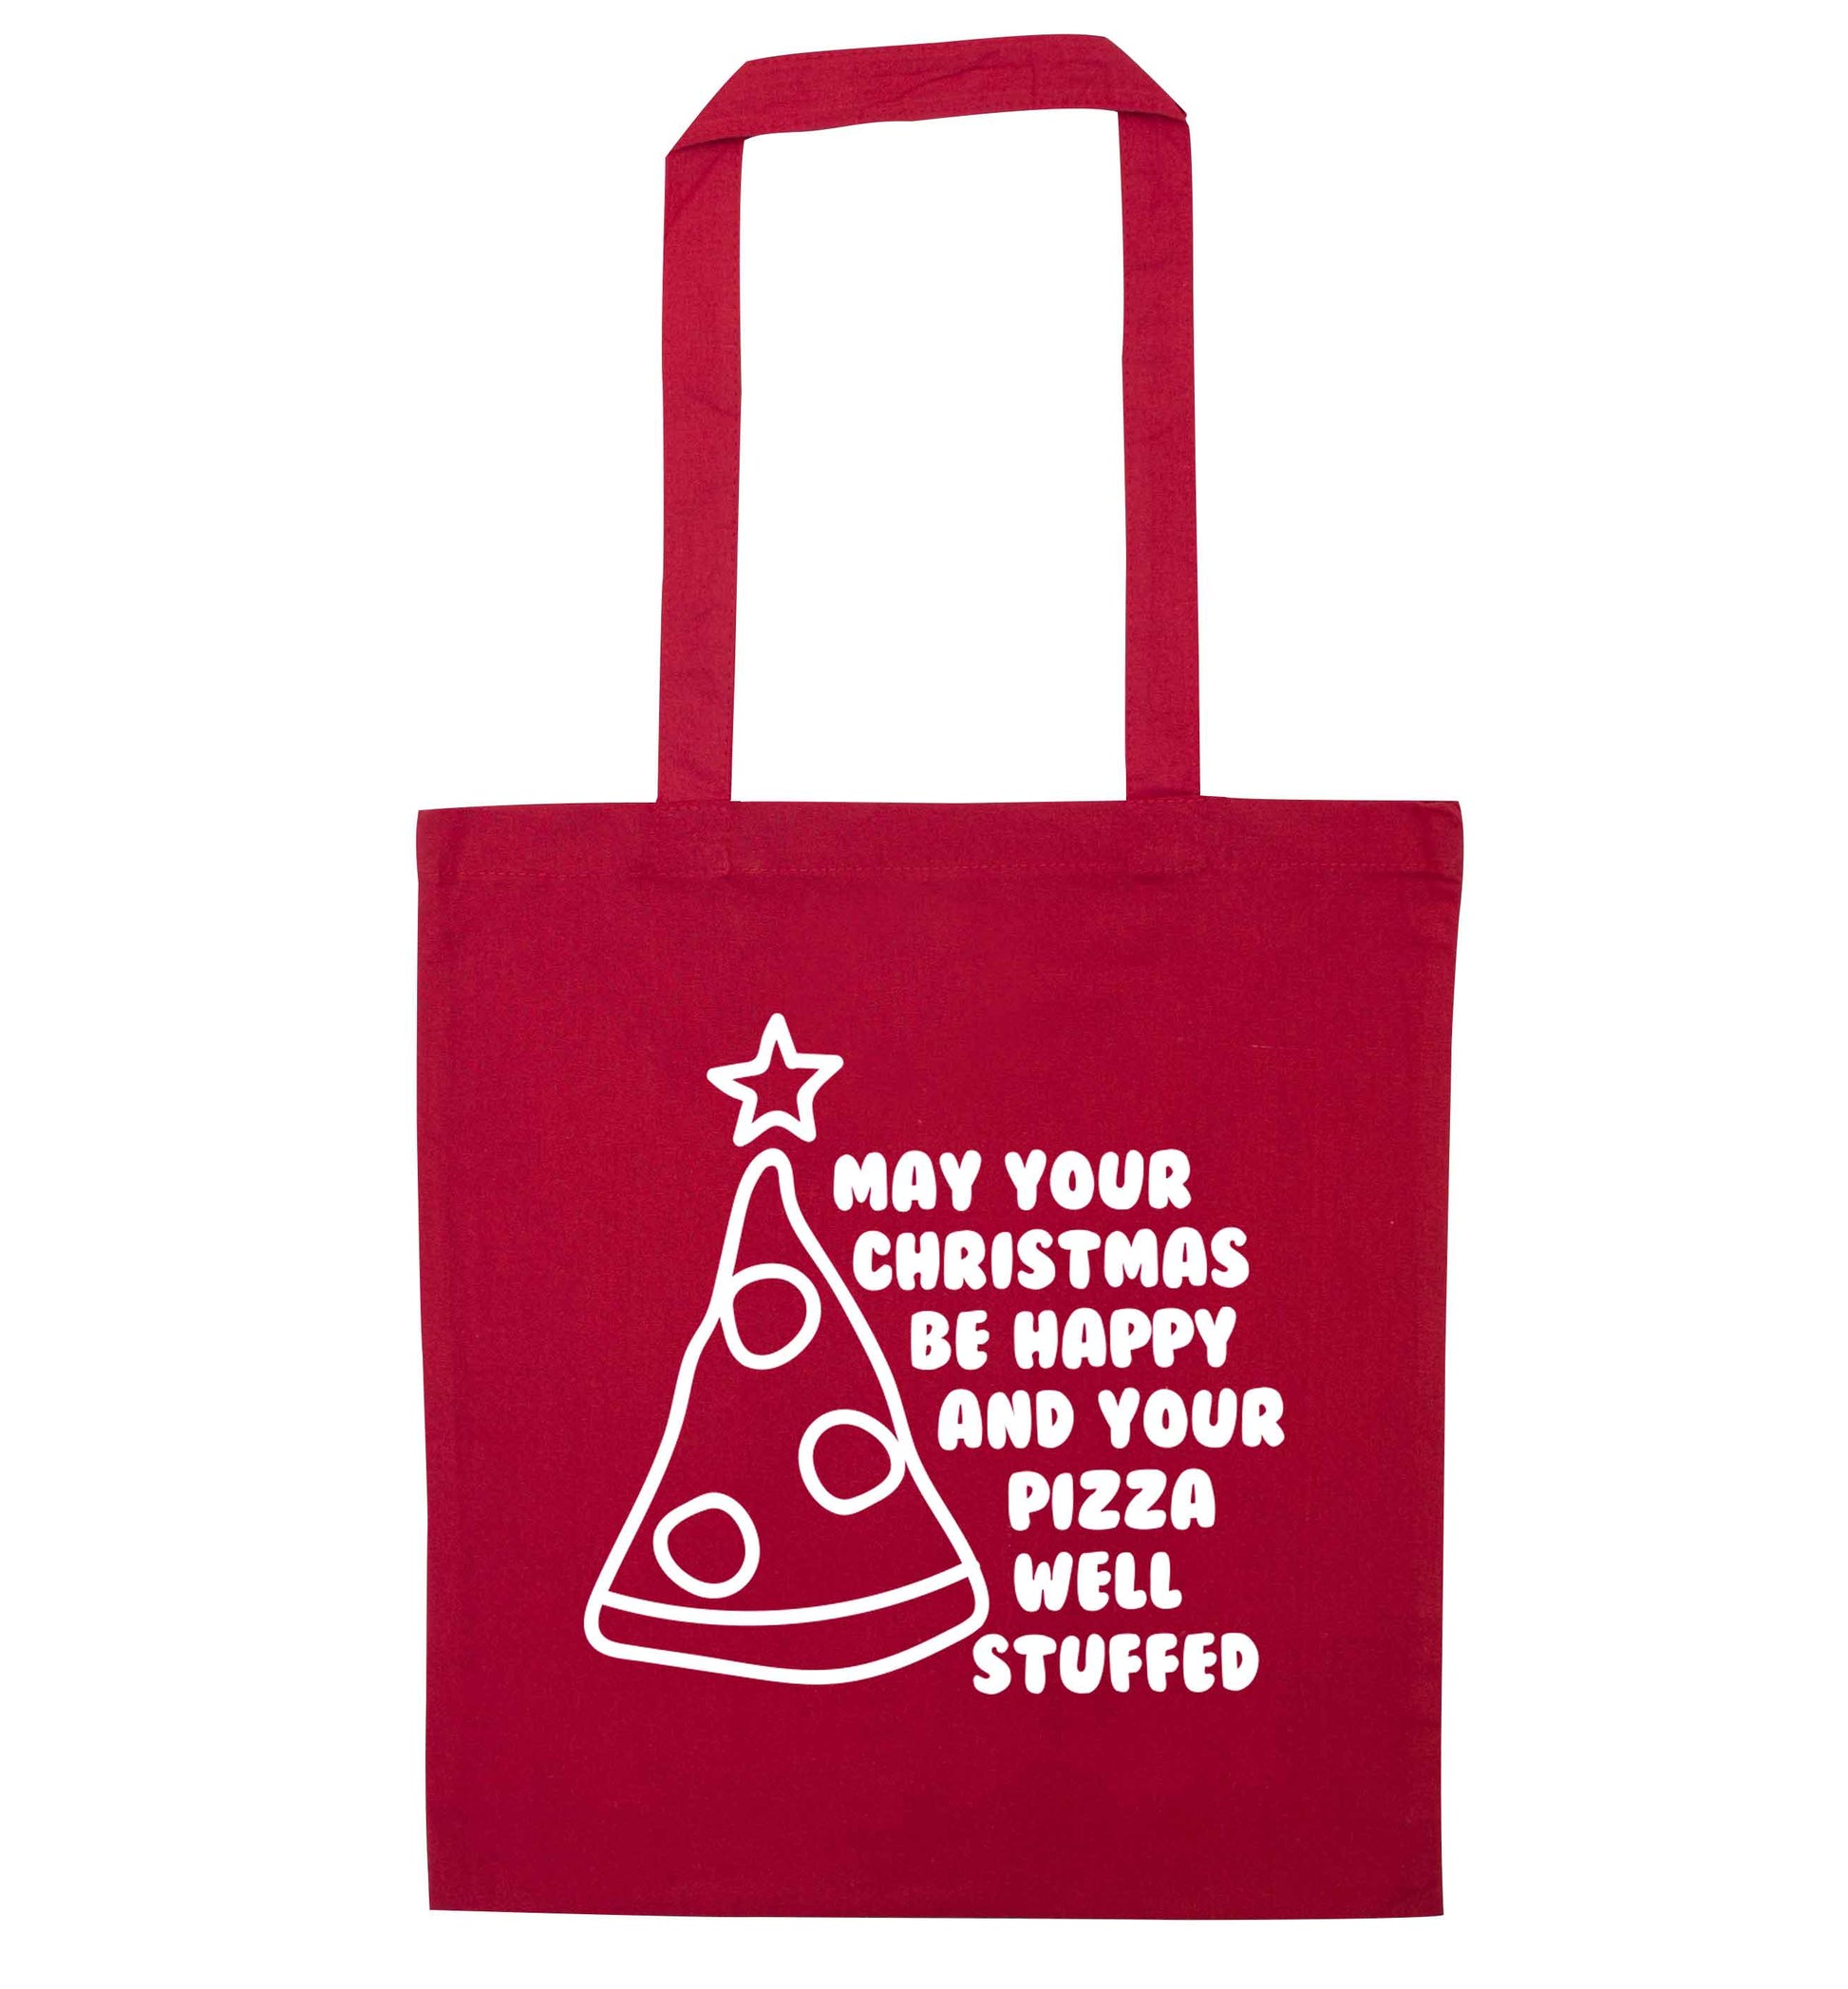 May your Christmas be happy and your pizza well stuffed red tote bag